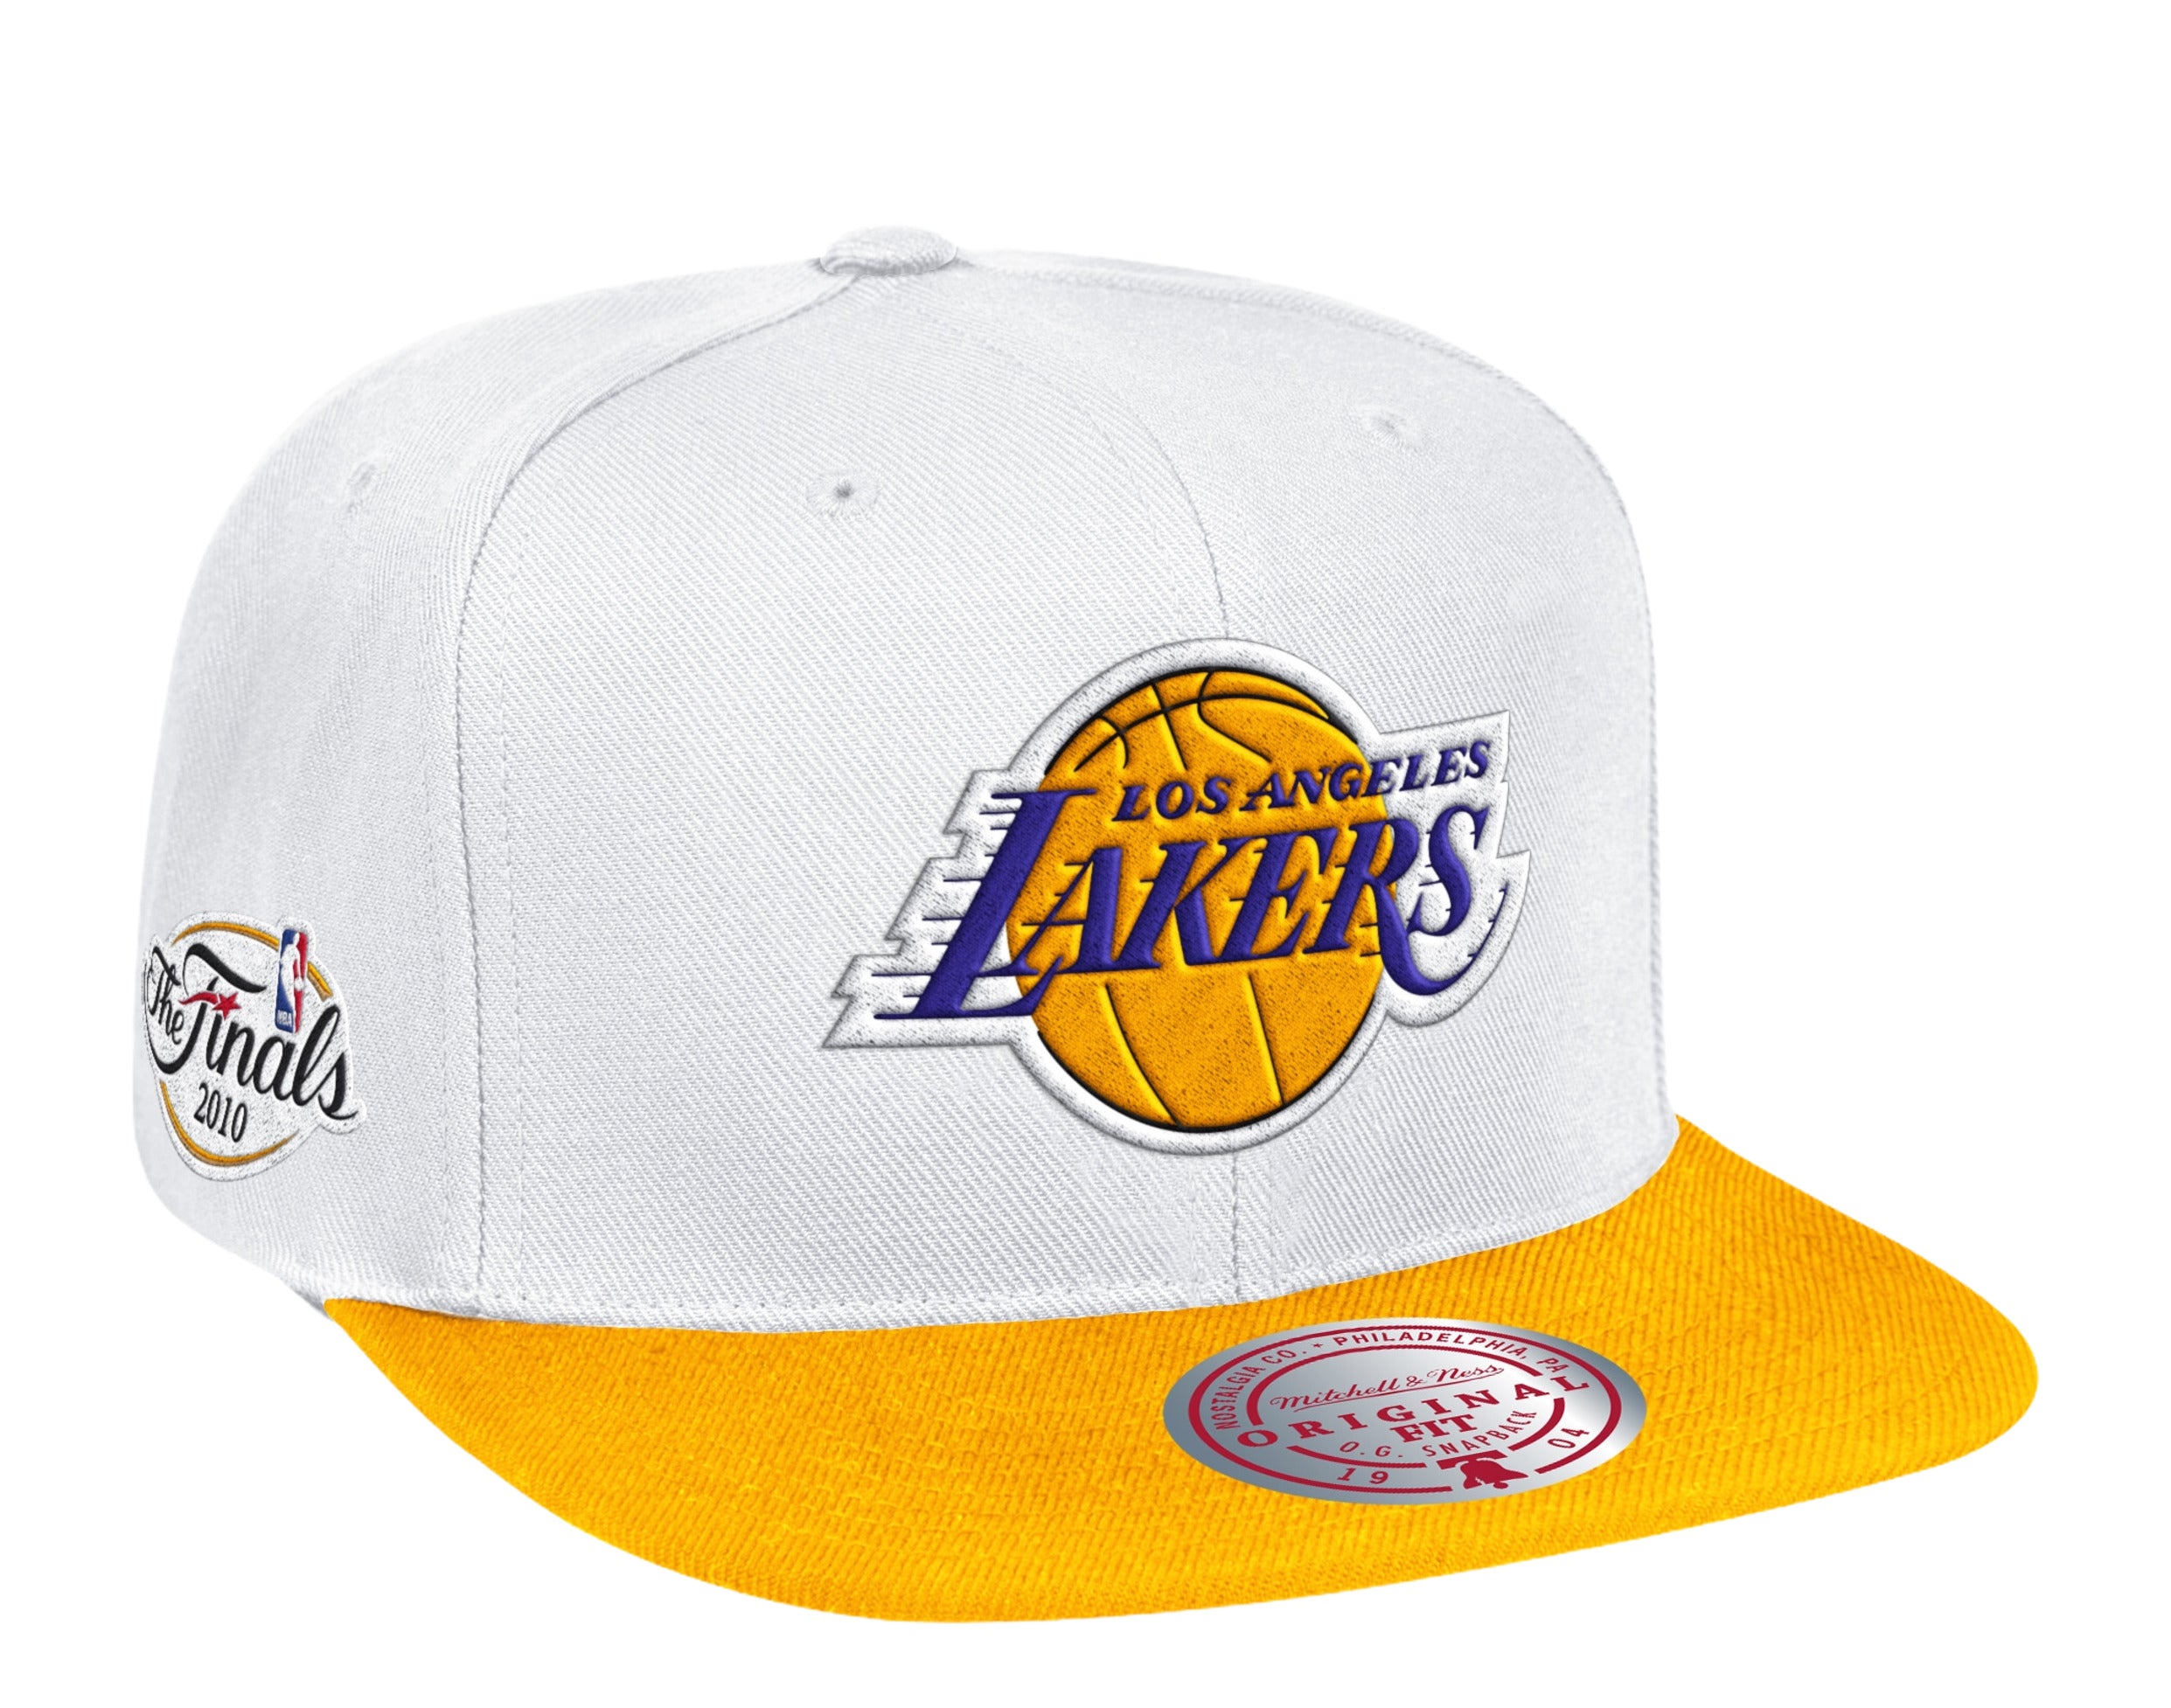 Mitchell and Ness NBA Los Angeles Lakers M&N 2010 NBA Champs Snapback Black